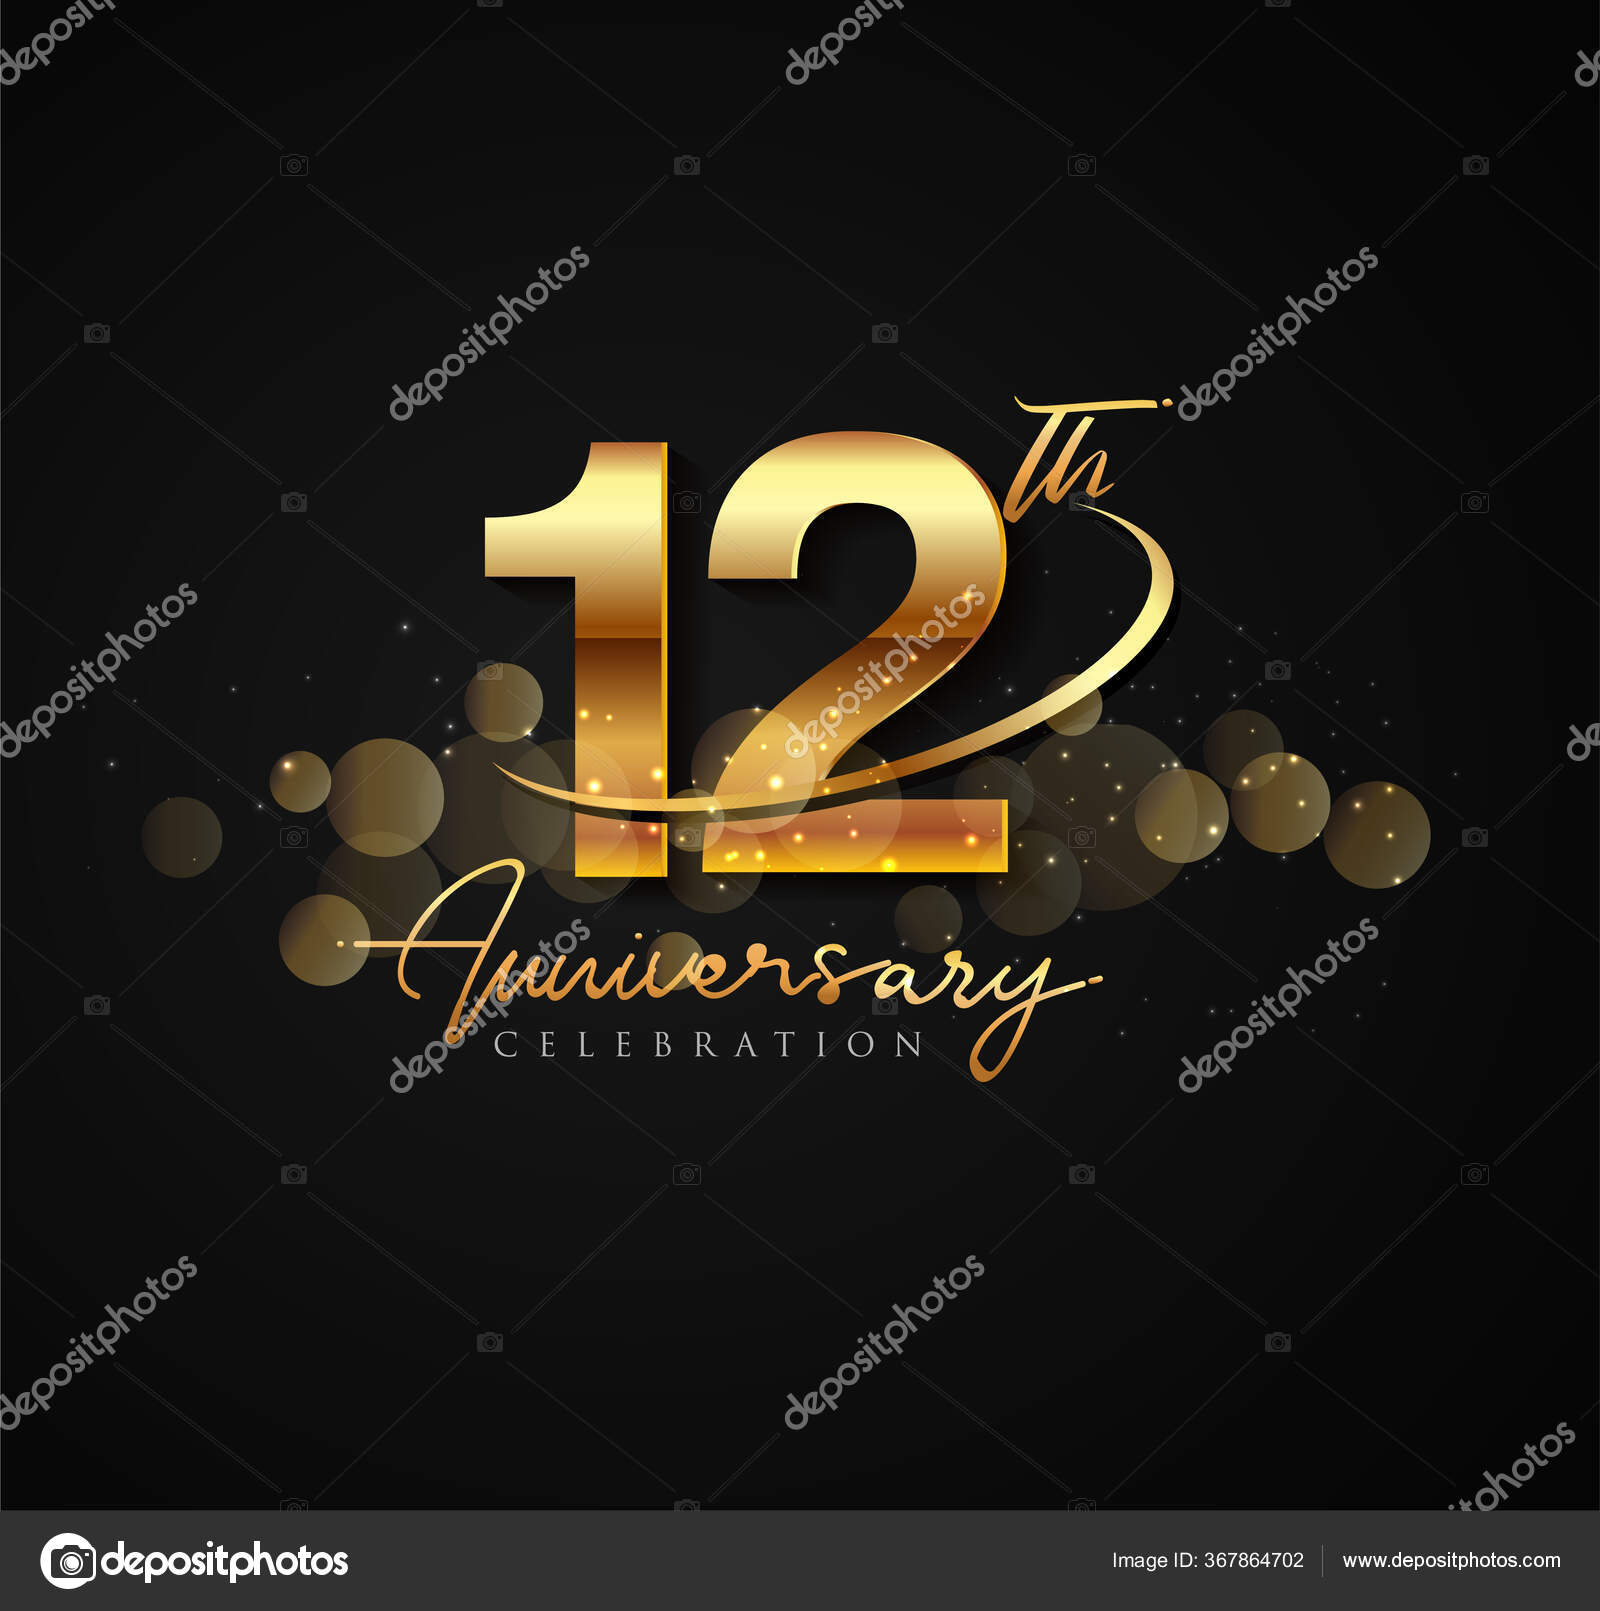 12th Anniversary With Swoosh And Arrow Icon Fast And Forward Golden  Anniversary Logo On Black Background Stock Illustration - Download Image  Now - iStock